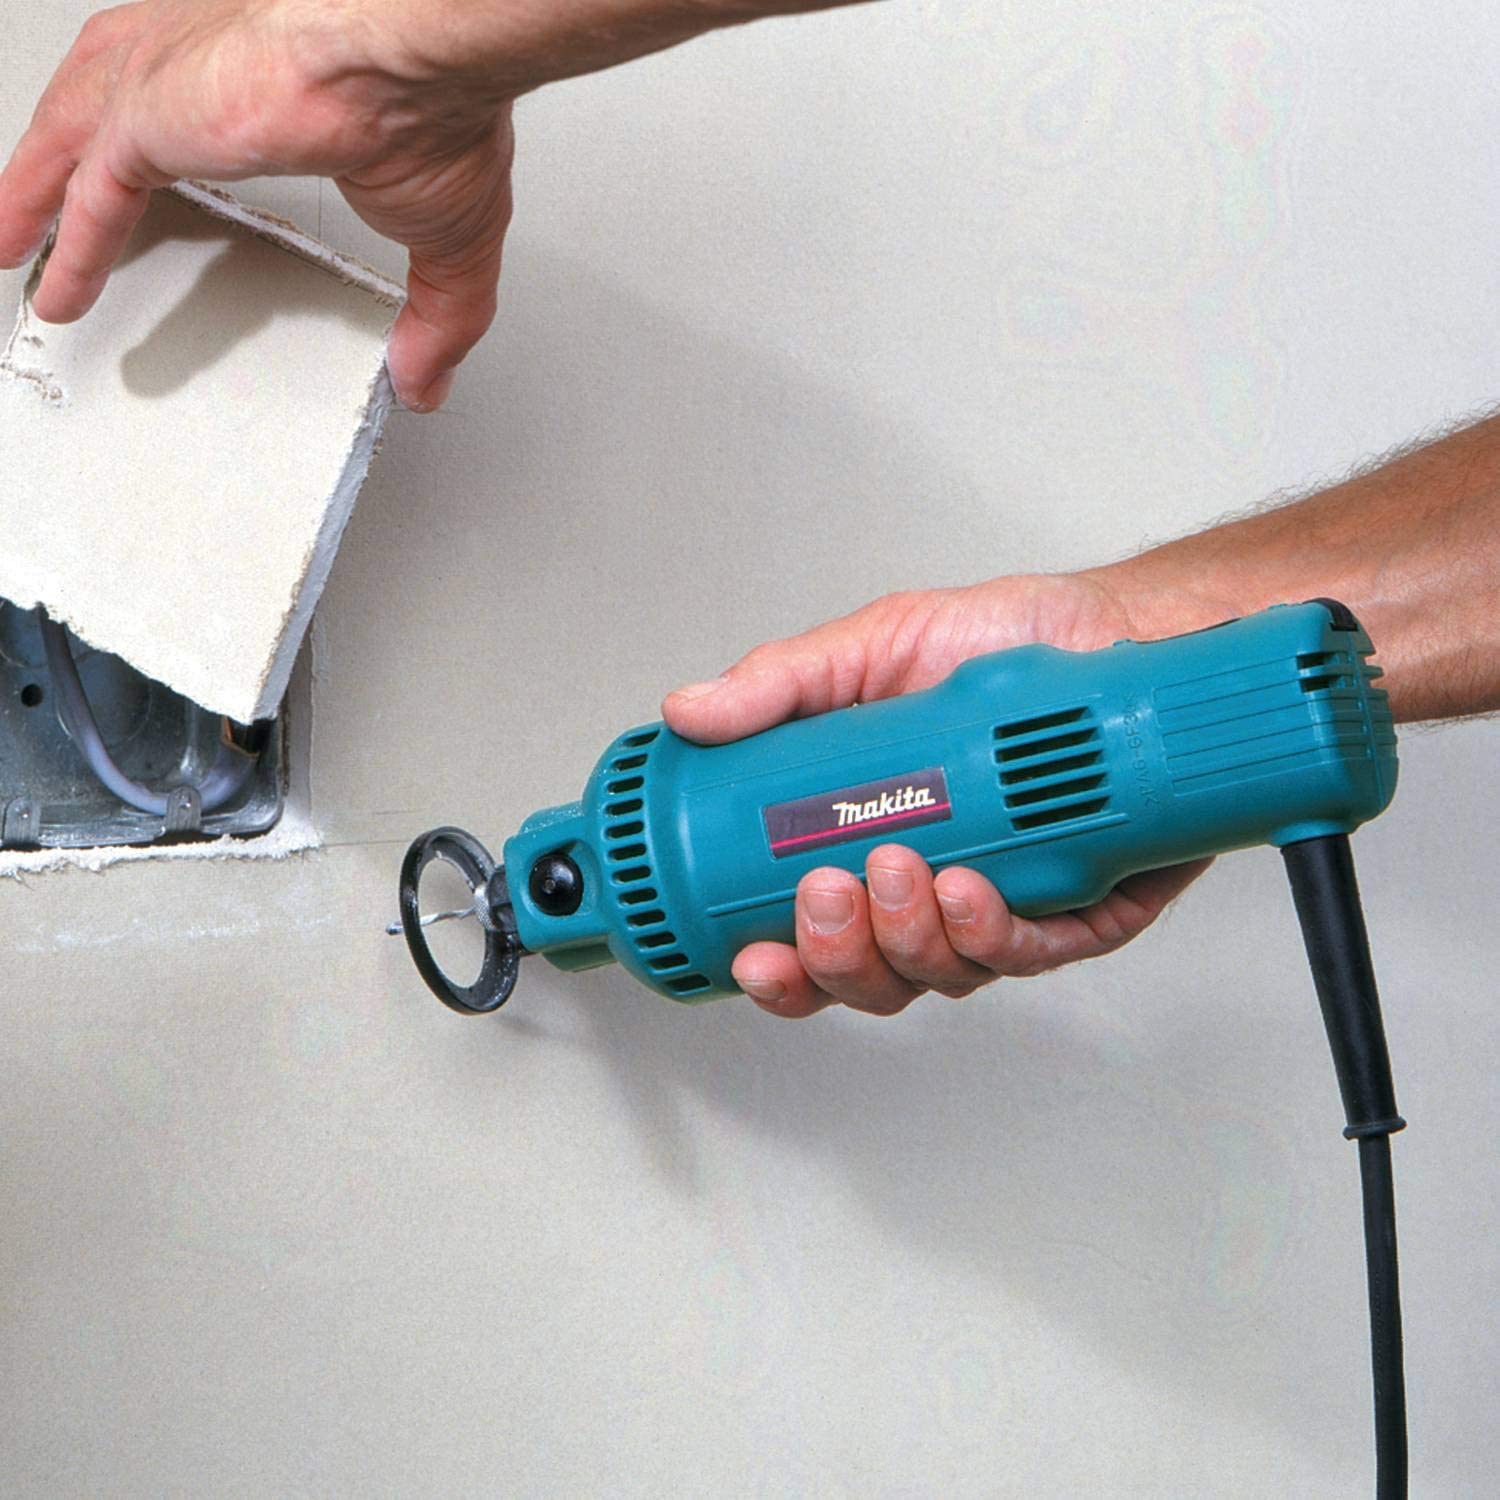 Best Tools for Cutting Drywall